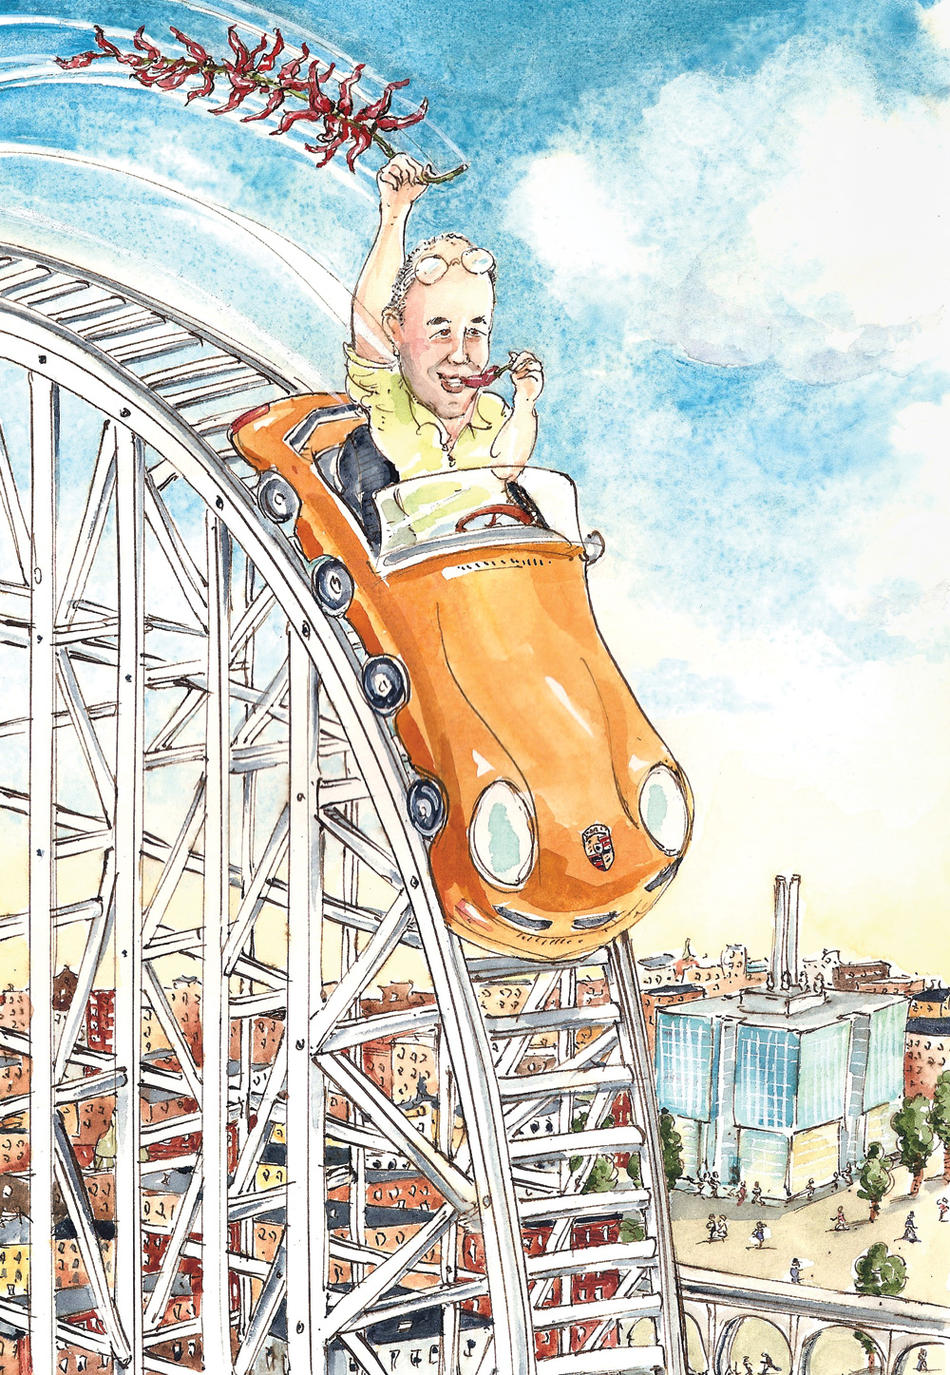 Illustration of Columbia scientist Charles Zuker on rollercoaster by Mark Steele